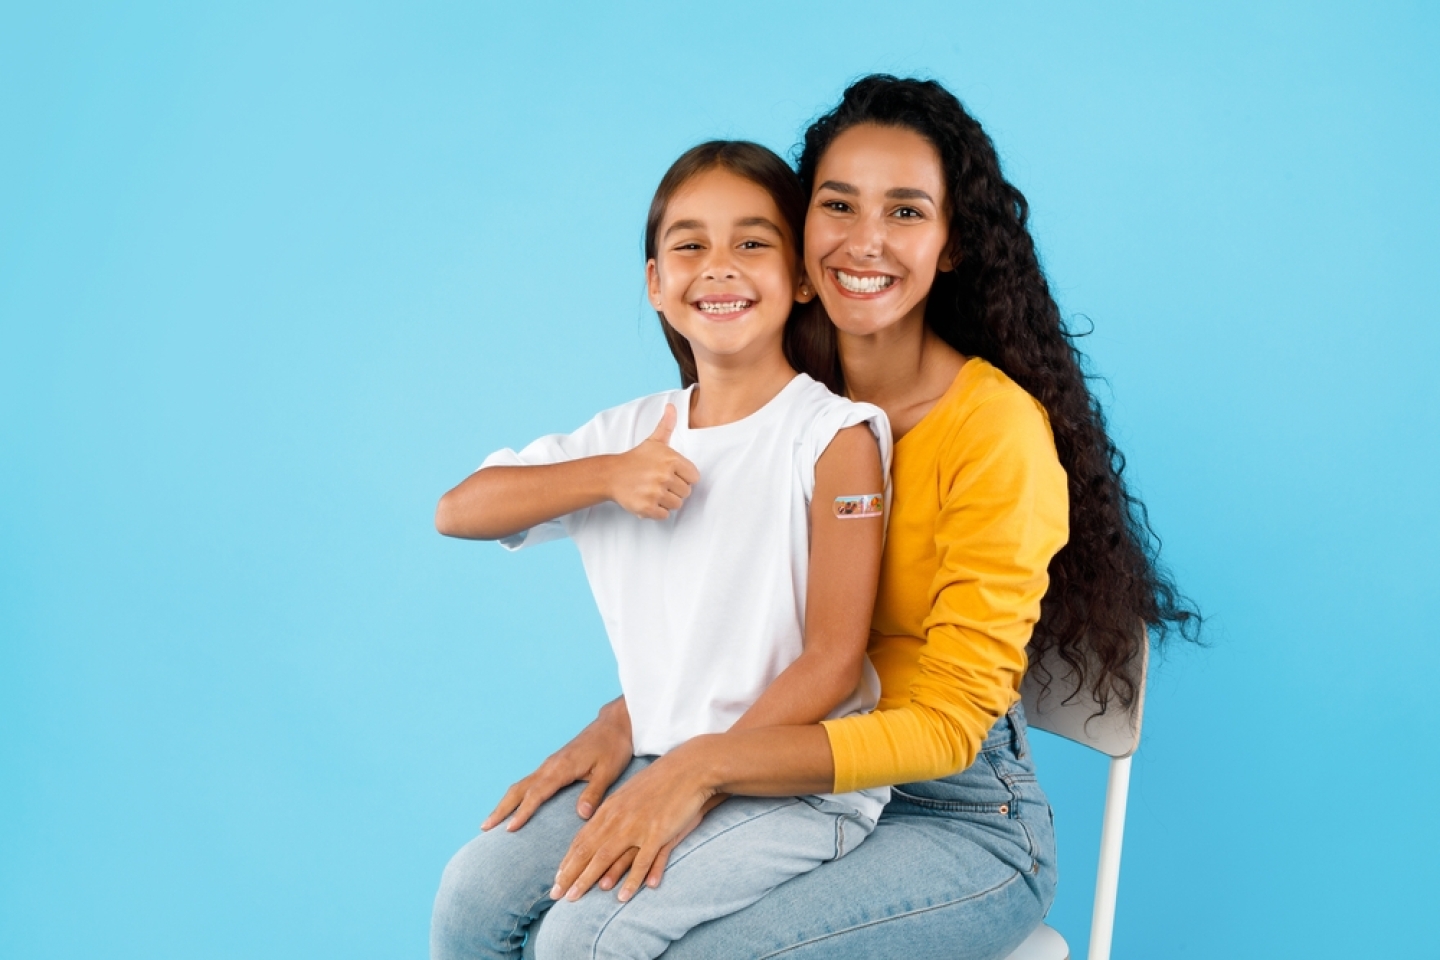 Arabic Girl And Her Mom Showing Vaccinated Arm And Thumbs Up Gesture After Covid-19 Vaccination Sitting Over Blue Background, Studio Shot.